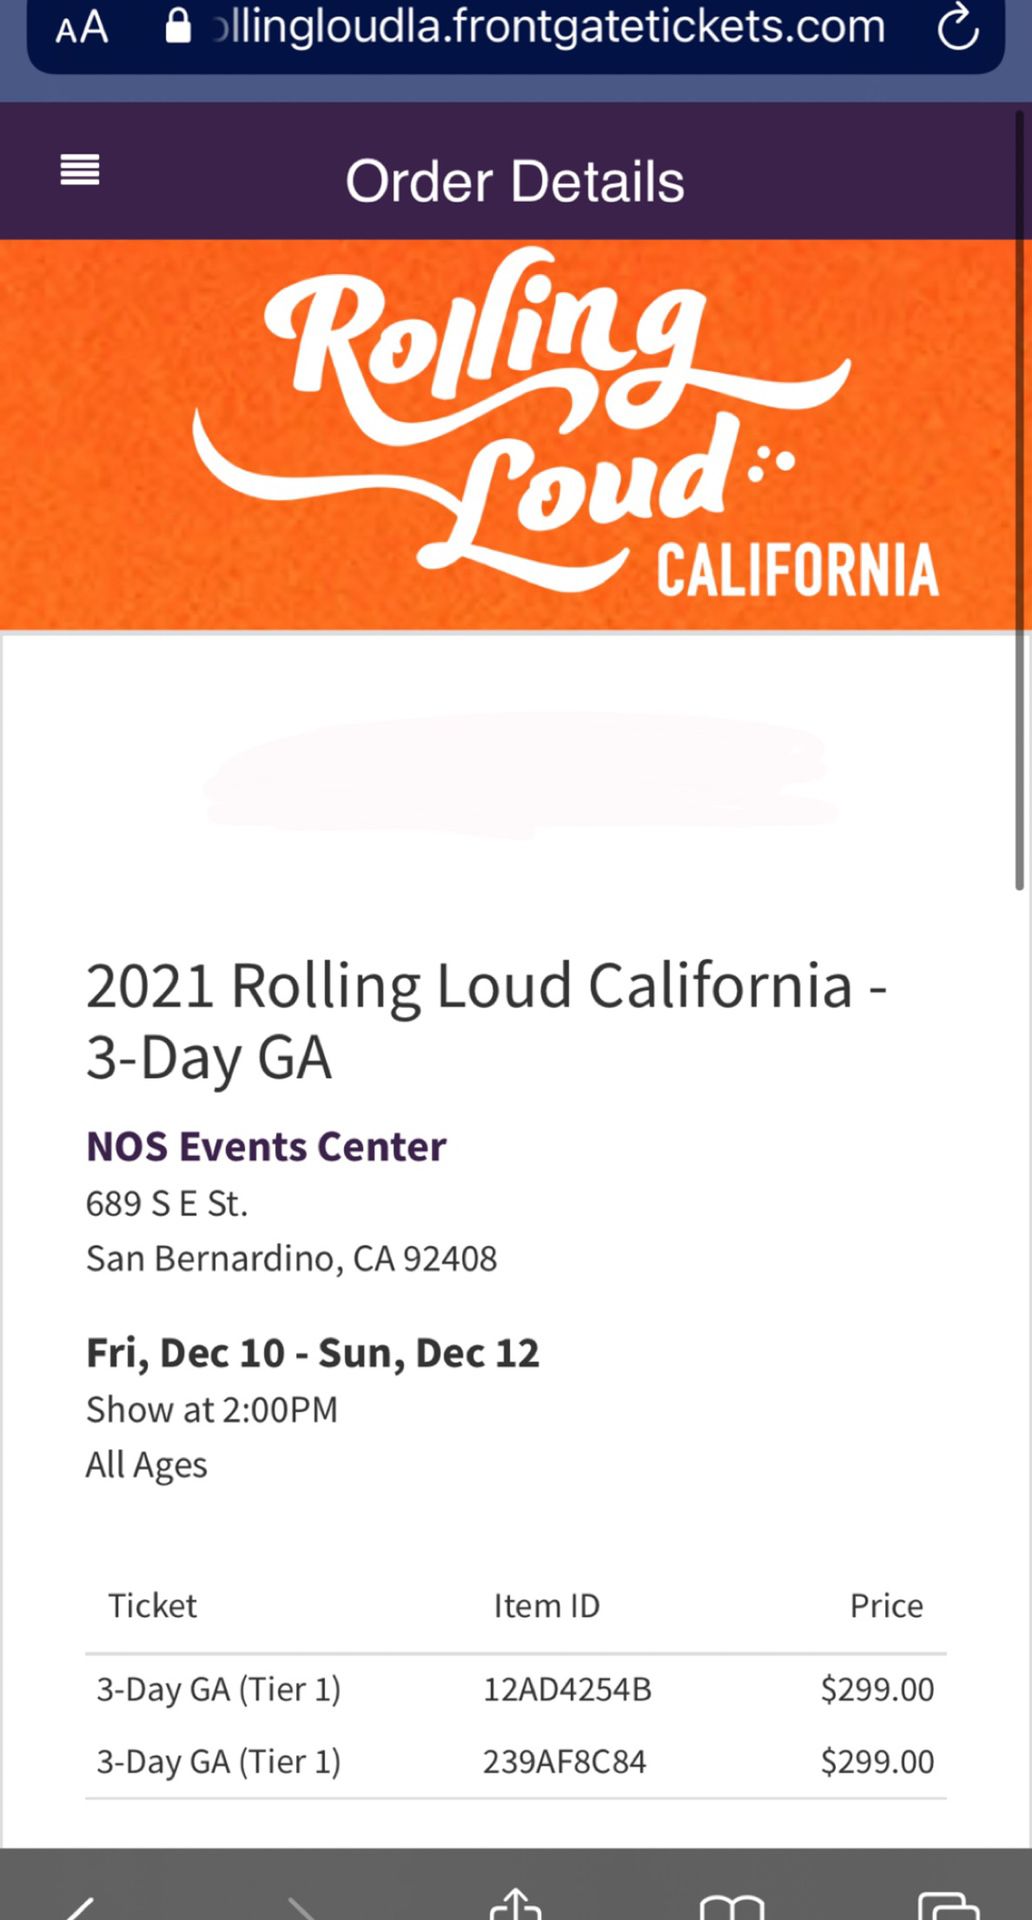 I have Two Rolling Loud tickets for the show in LA dec 10-12. Tickets are for all 3-days. 